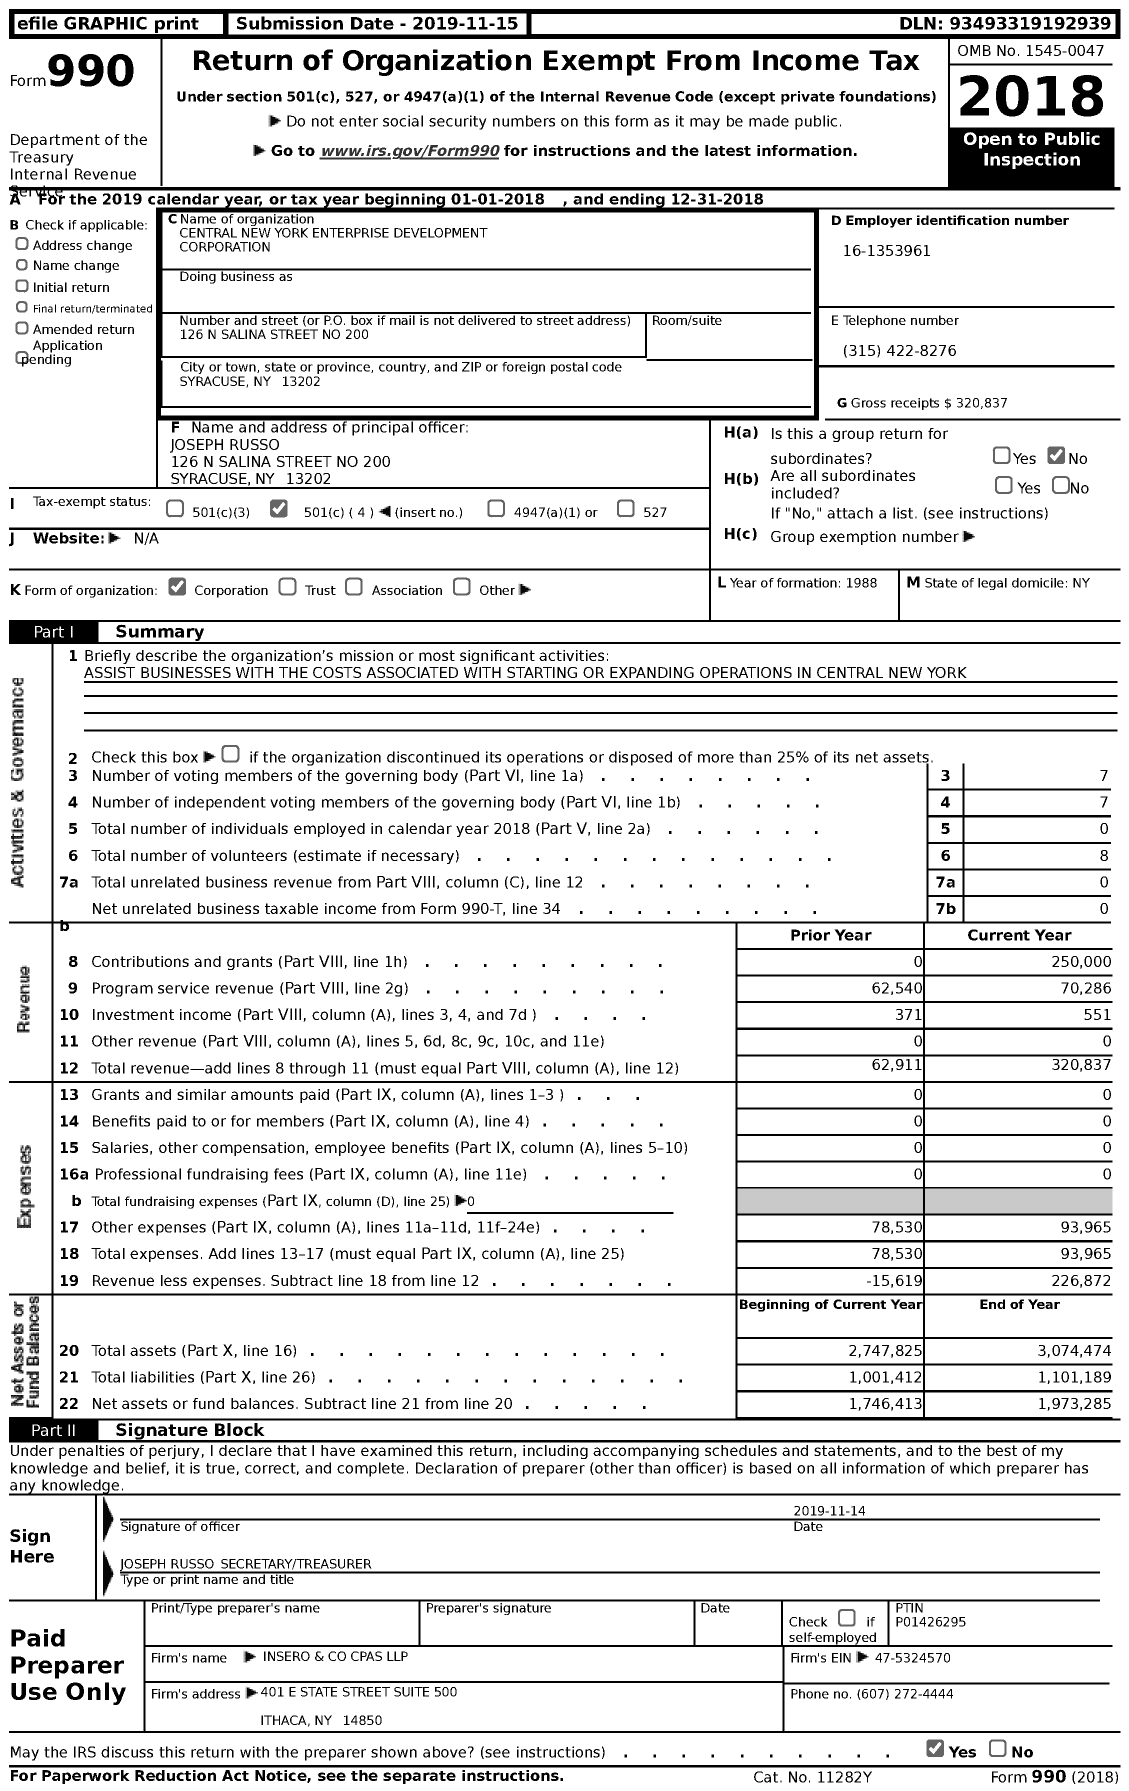 Image of first page of 2018 Form 990 for Central New York Enterprise Development Corporation